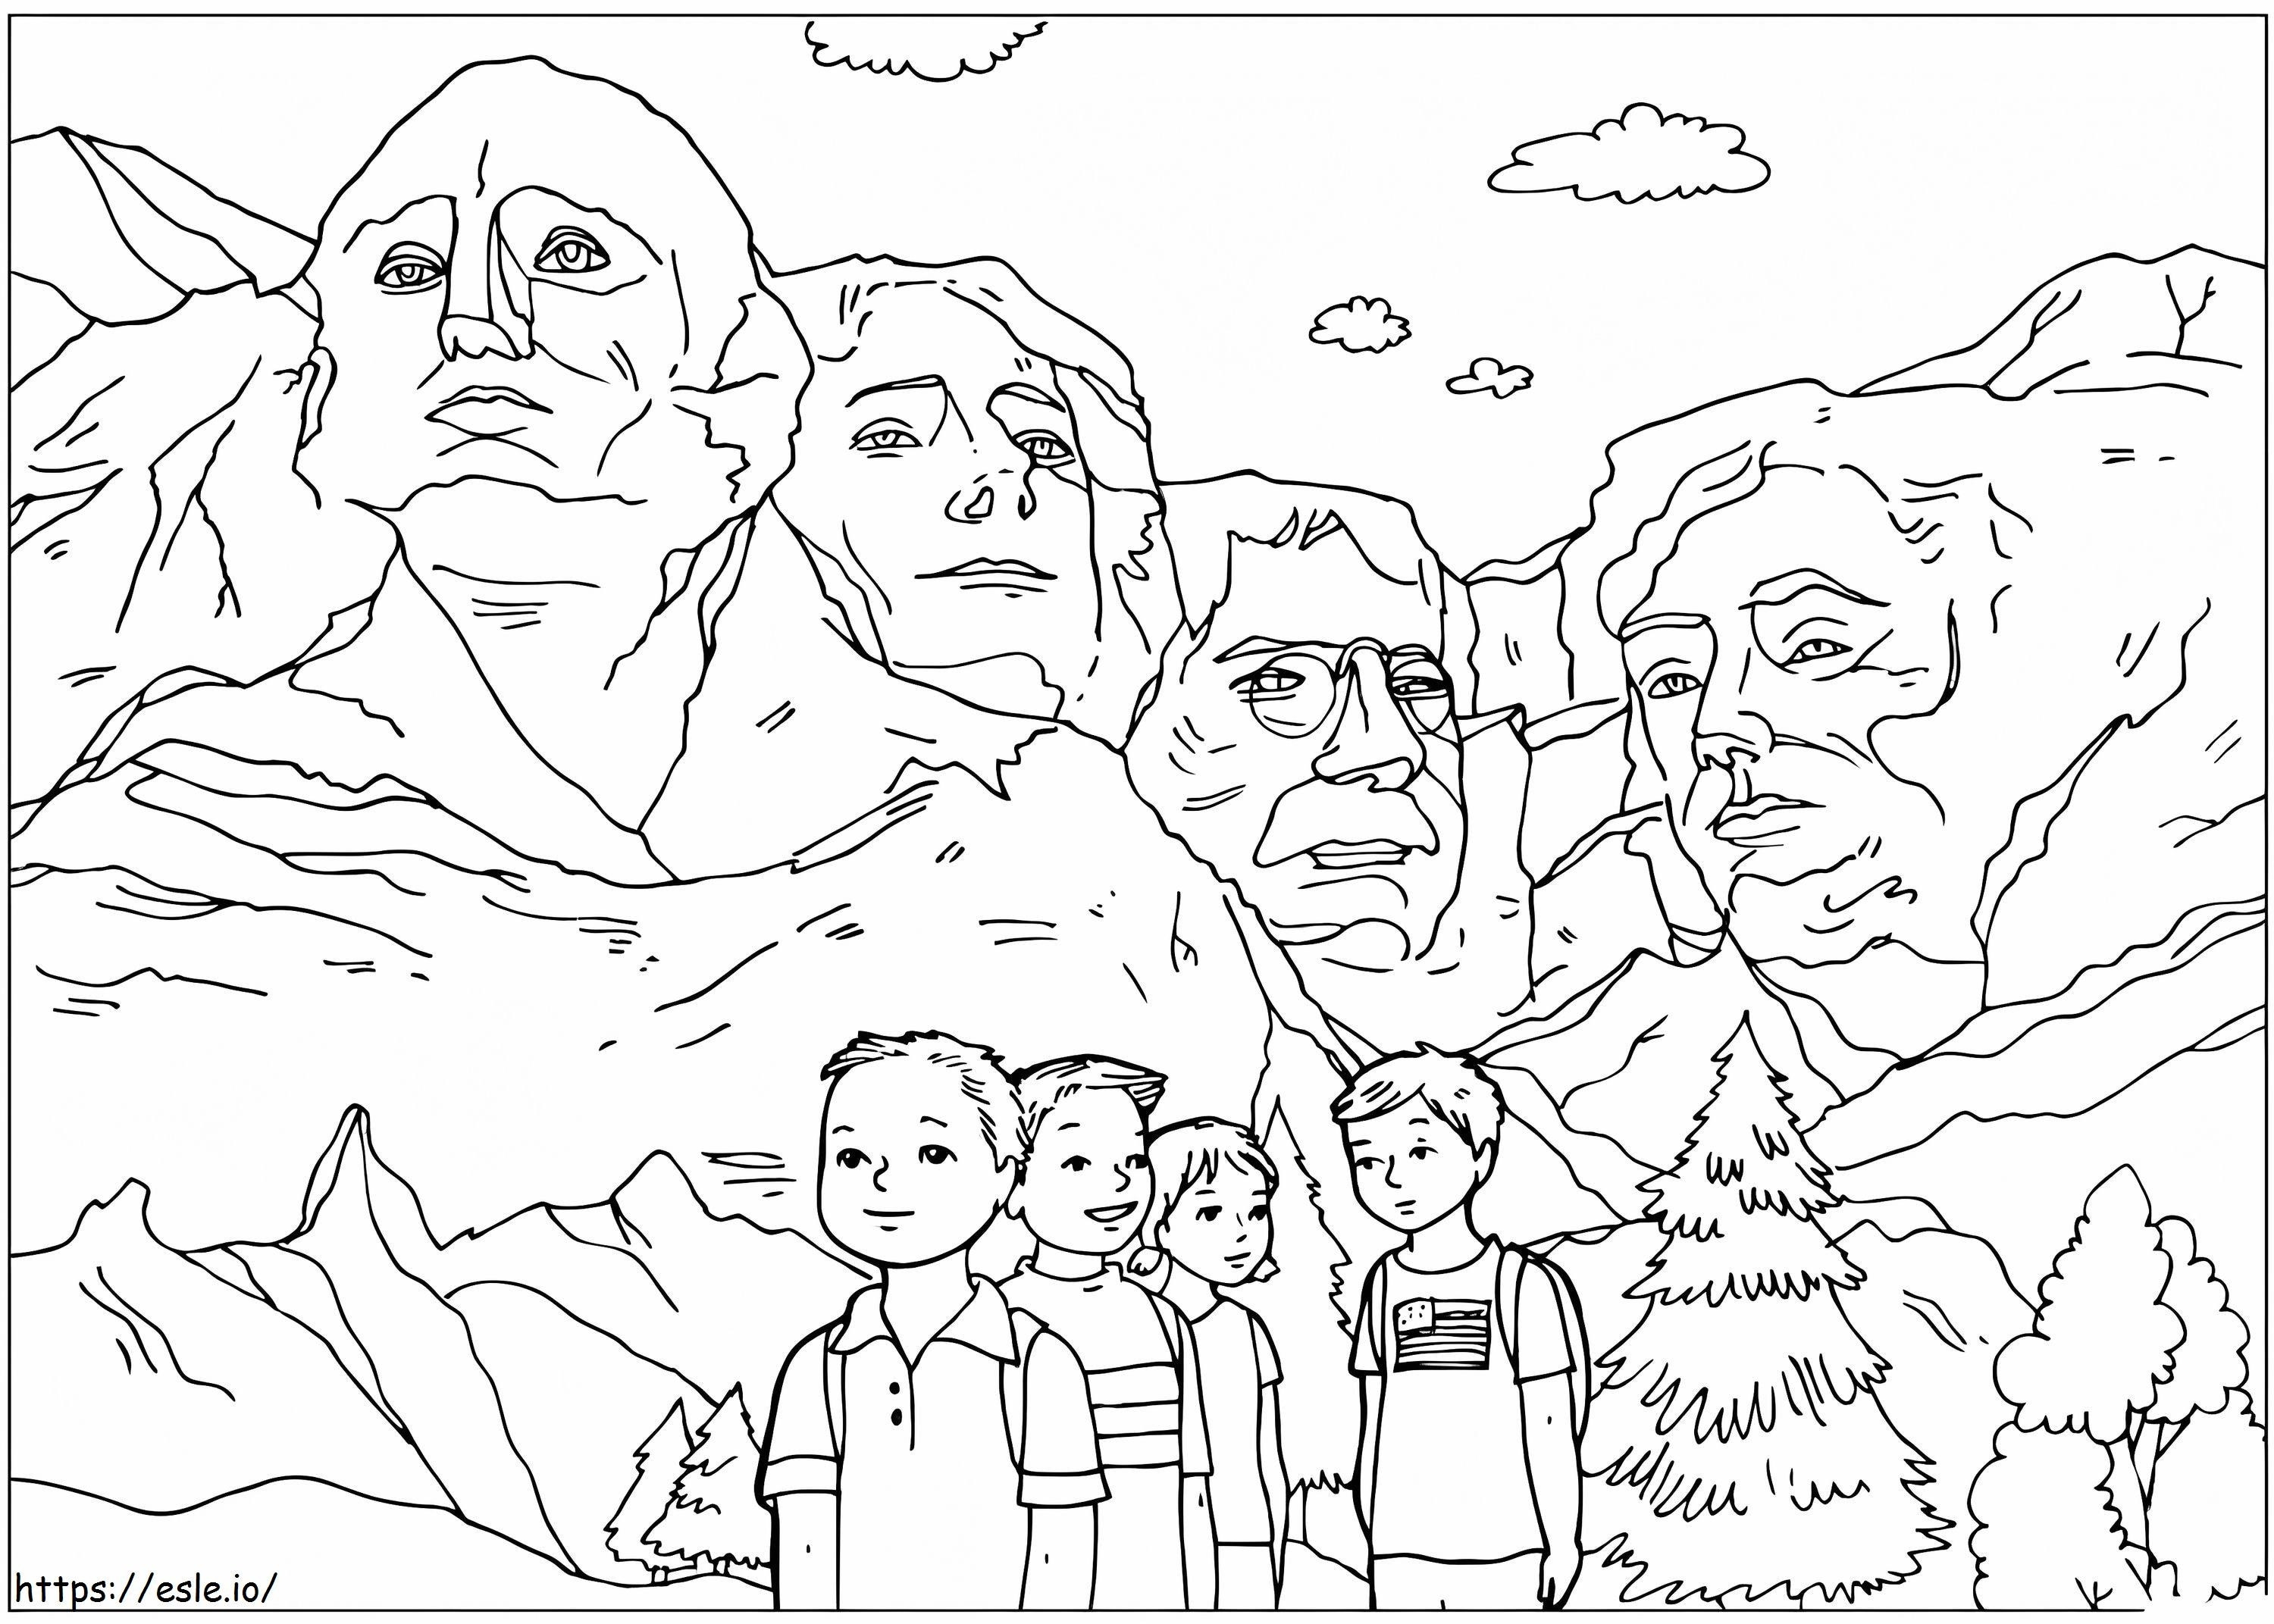 Free Mount Rushmore coloring page